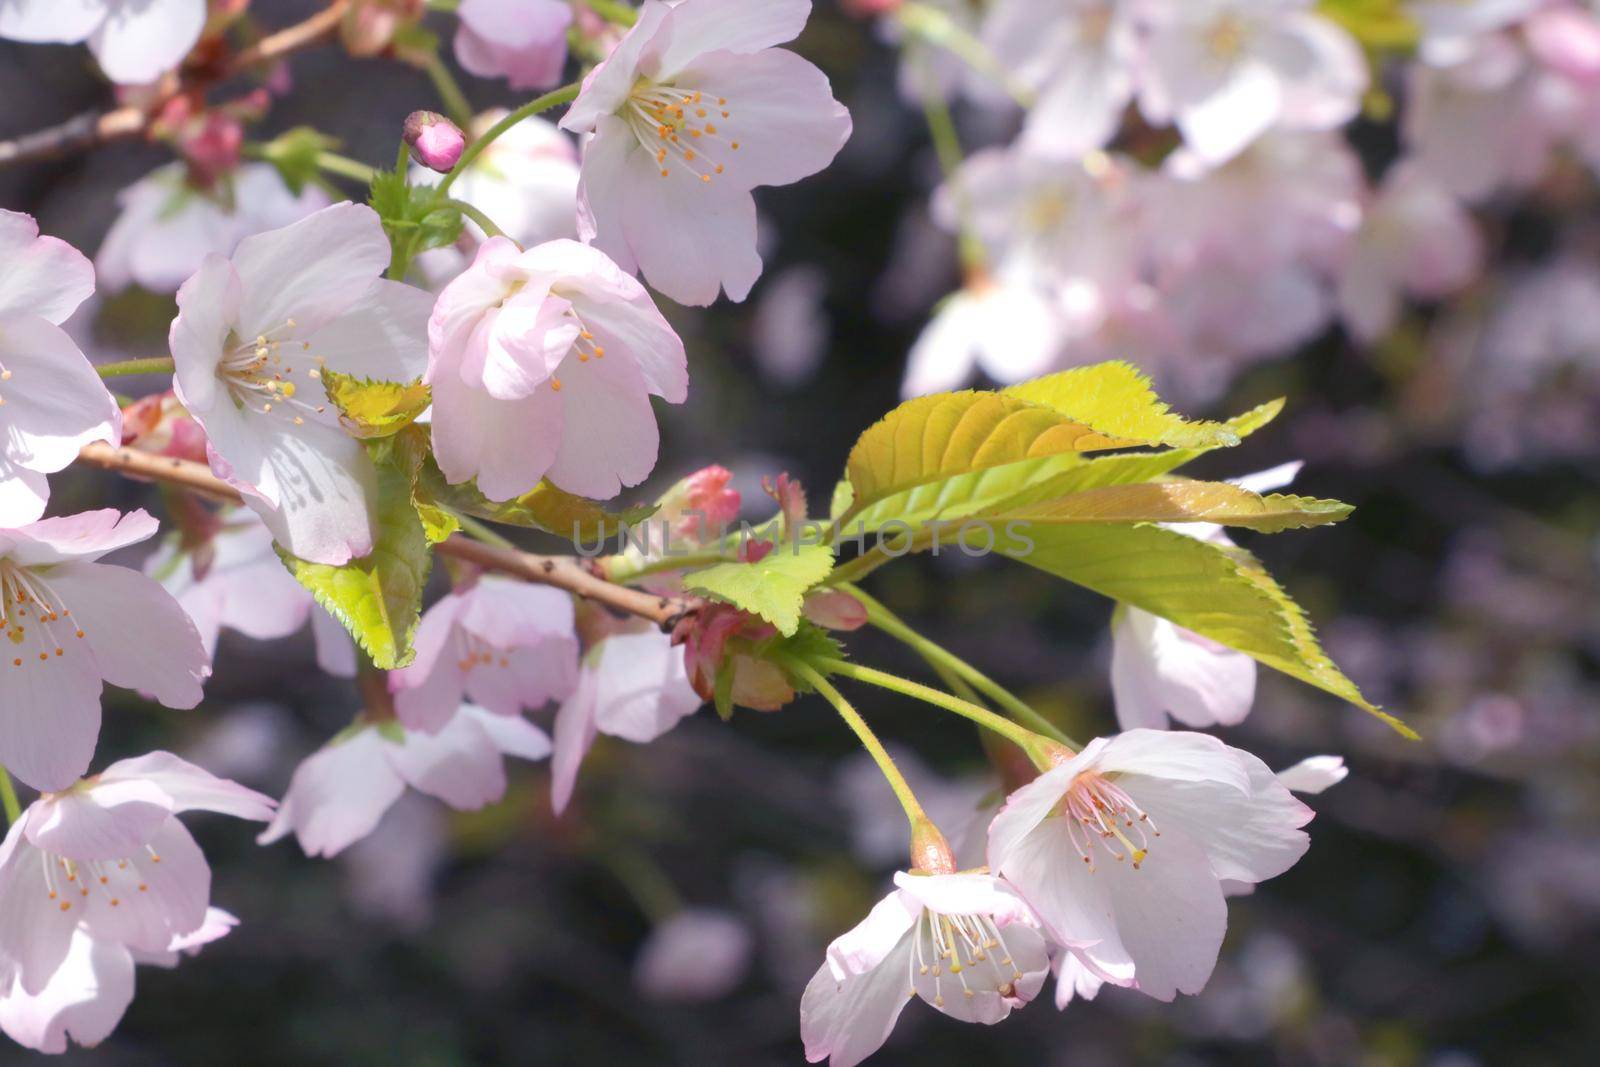 Close-up of a cherry blossom branch in the spring in the garden